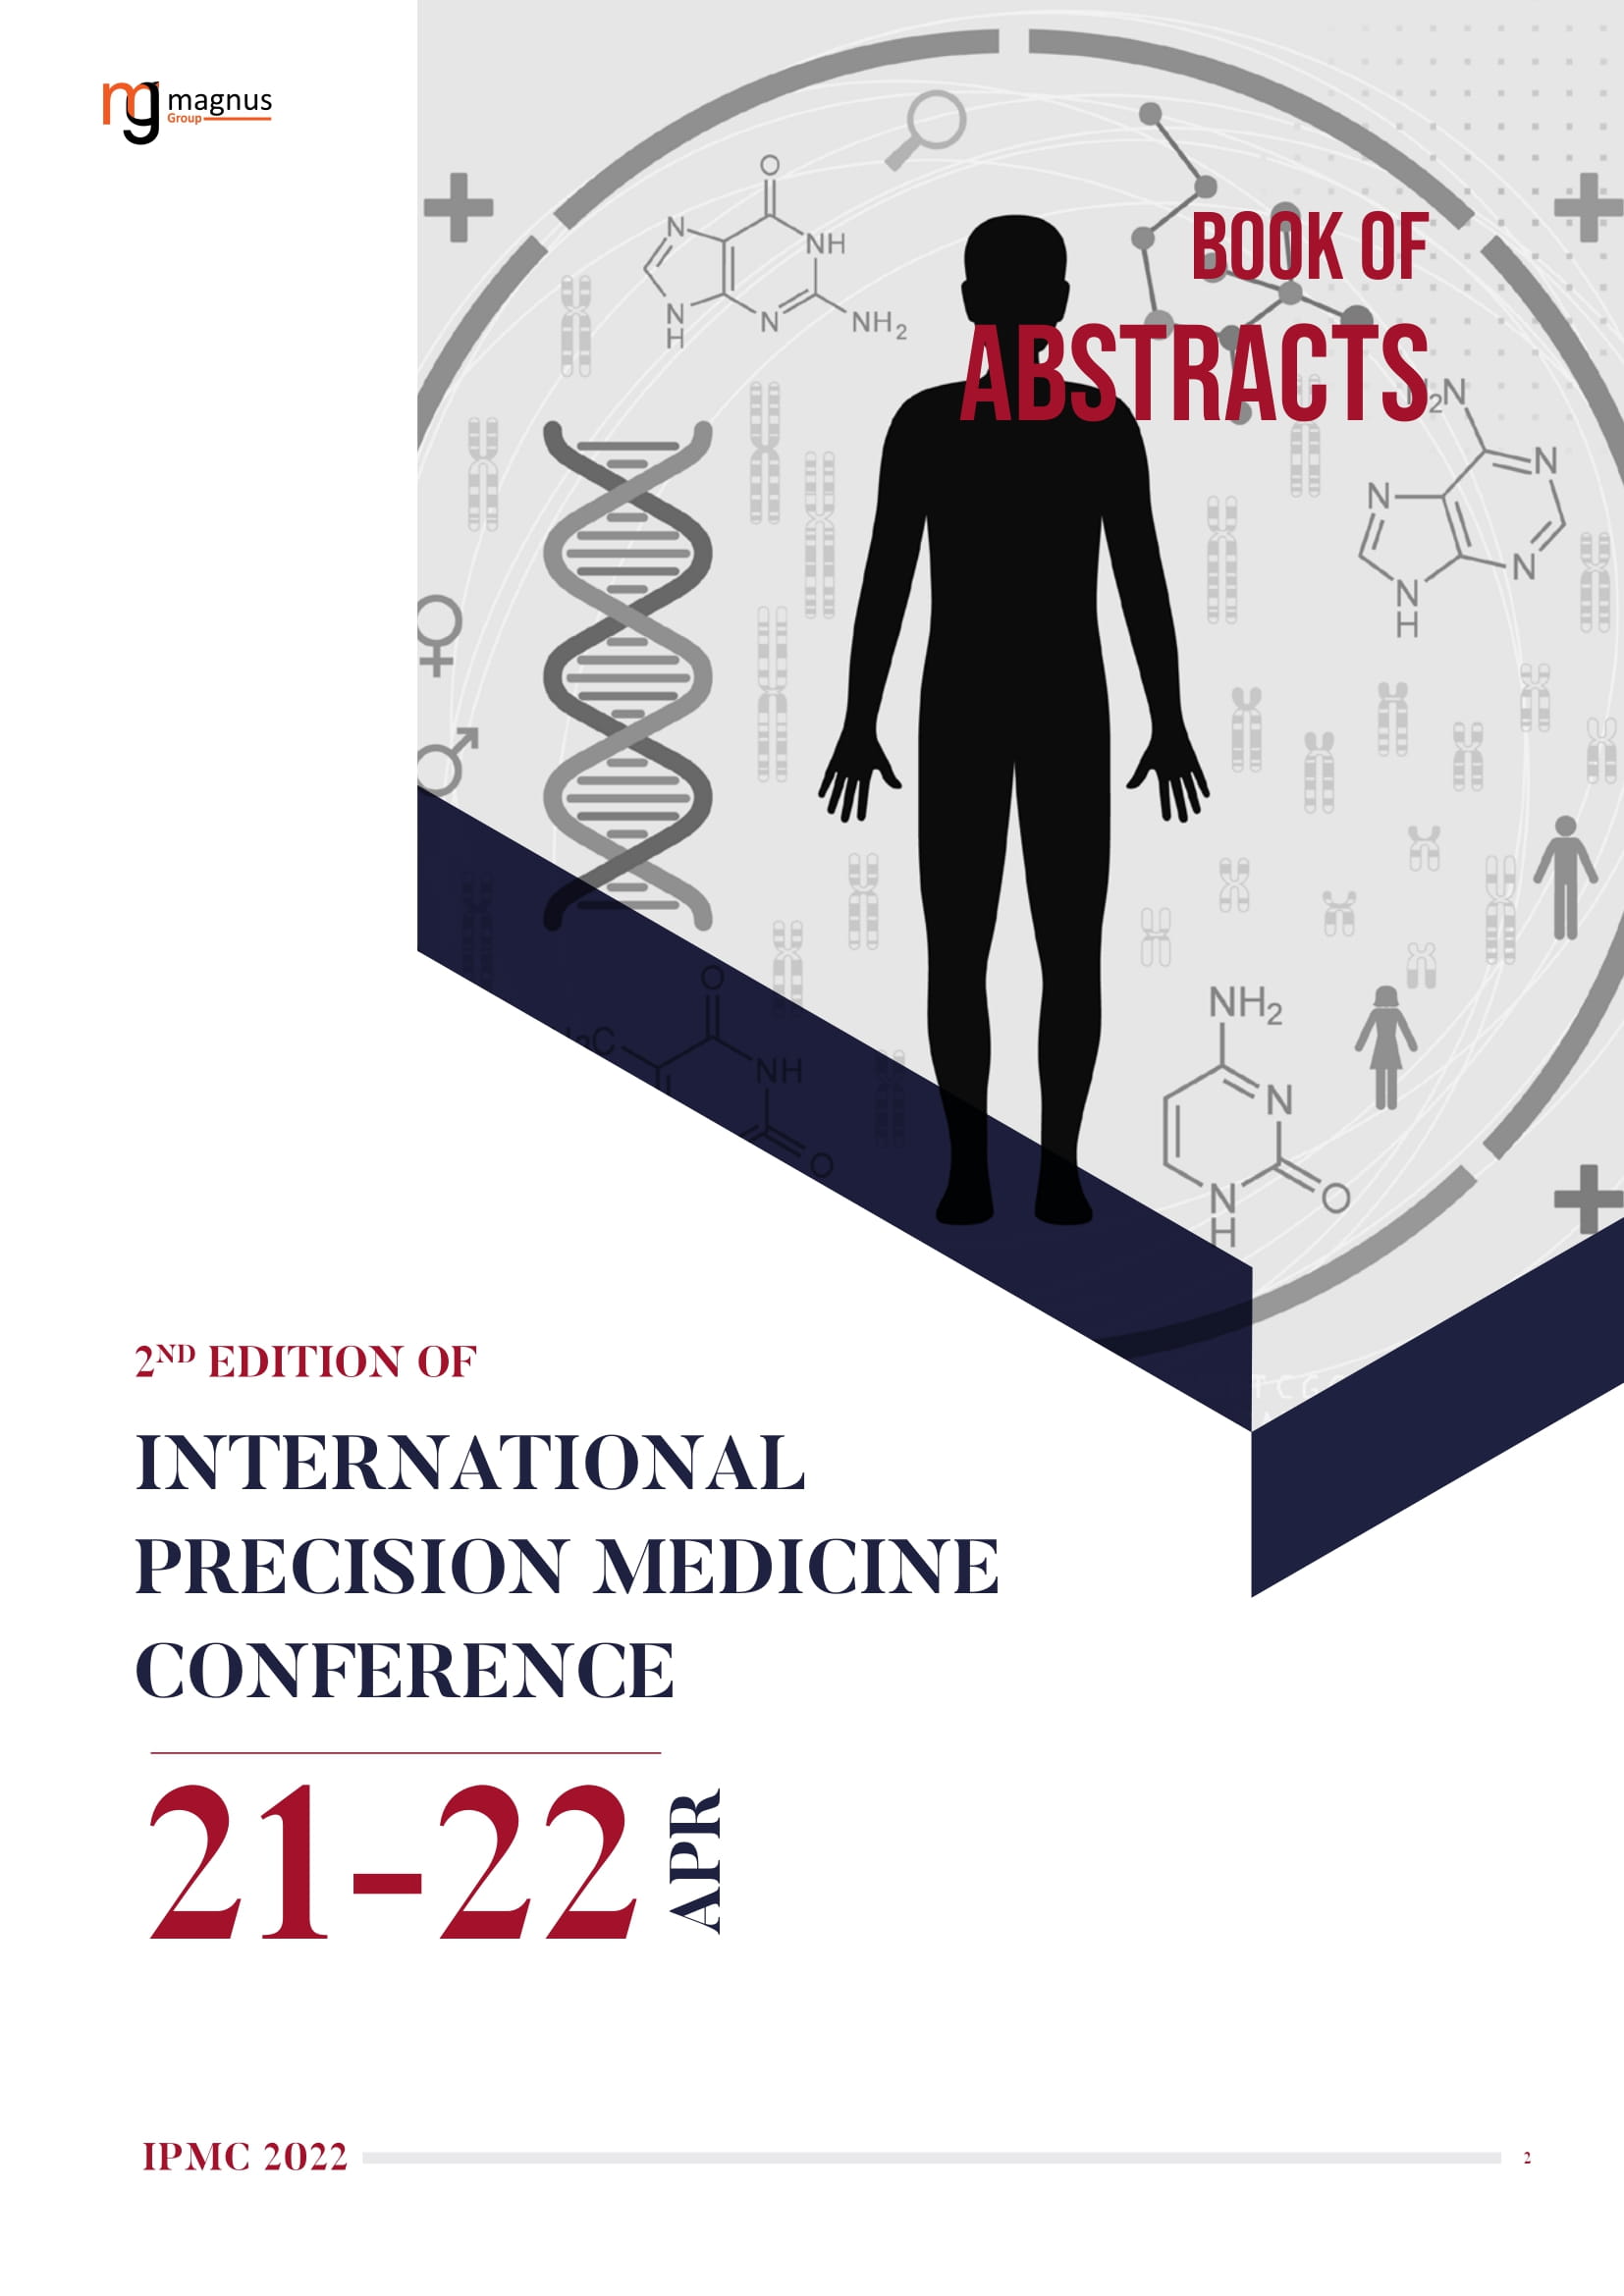 2nd Edition of International Precision Medicine Conference | Online Event Book